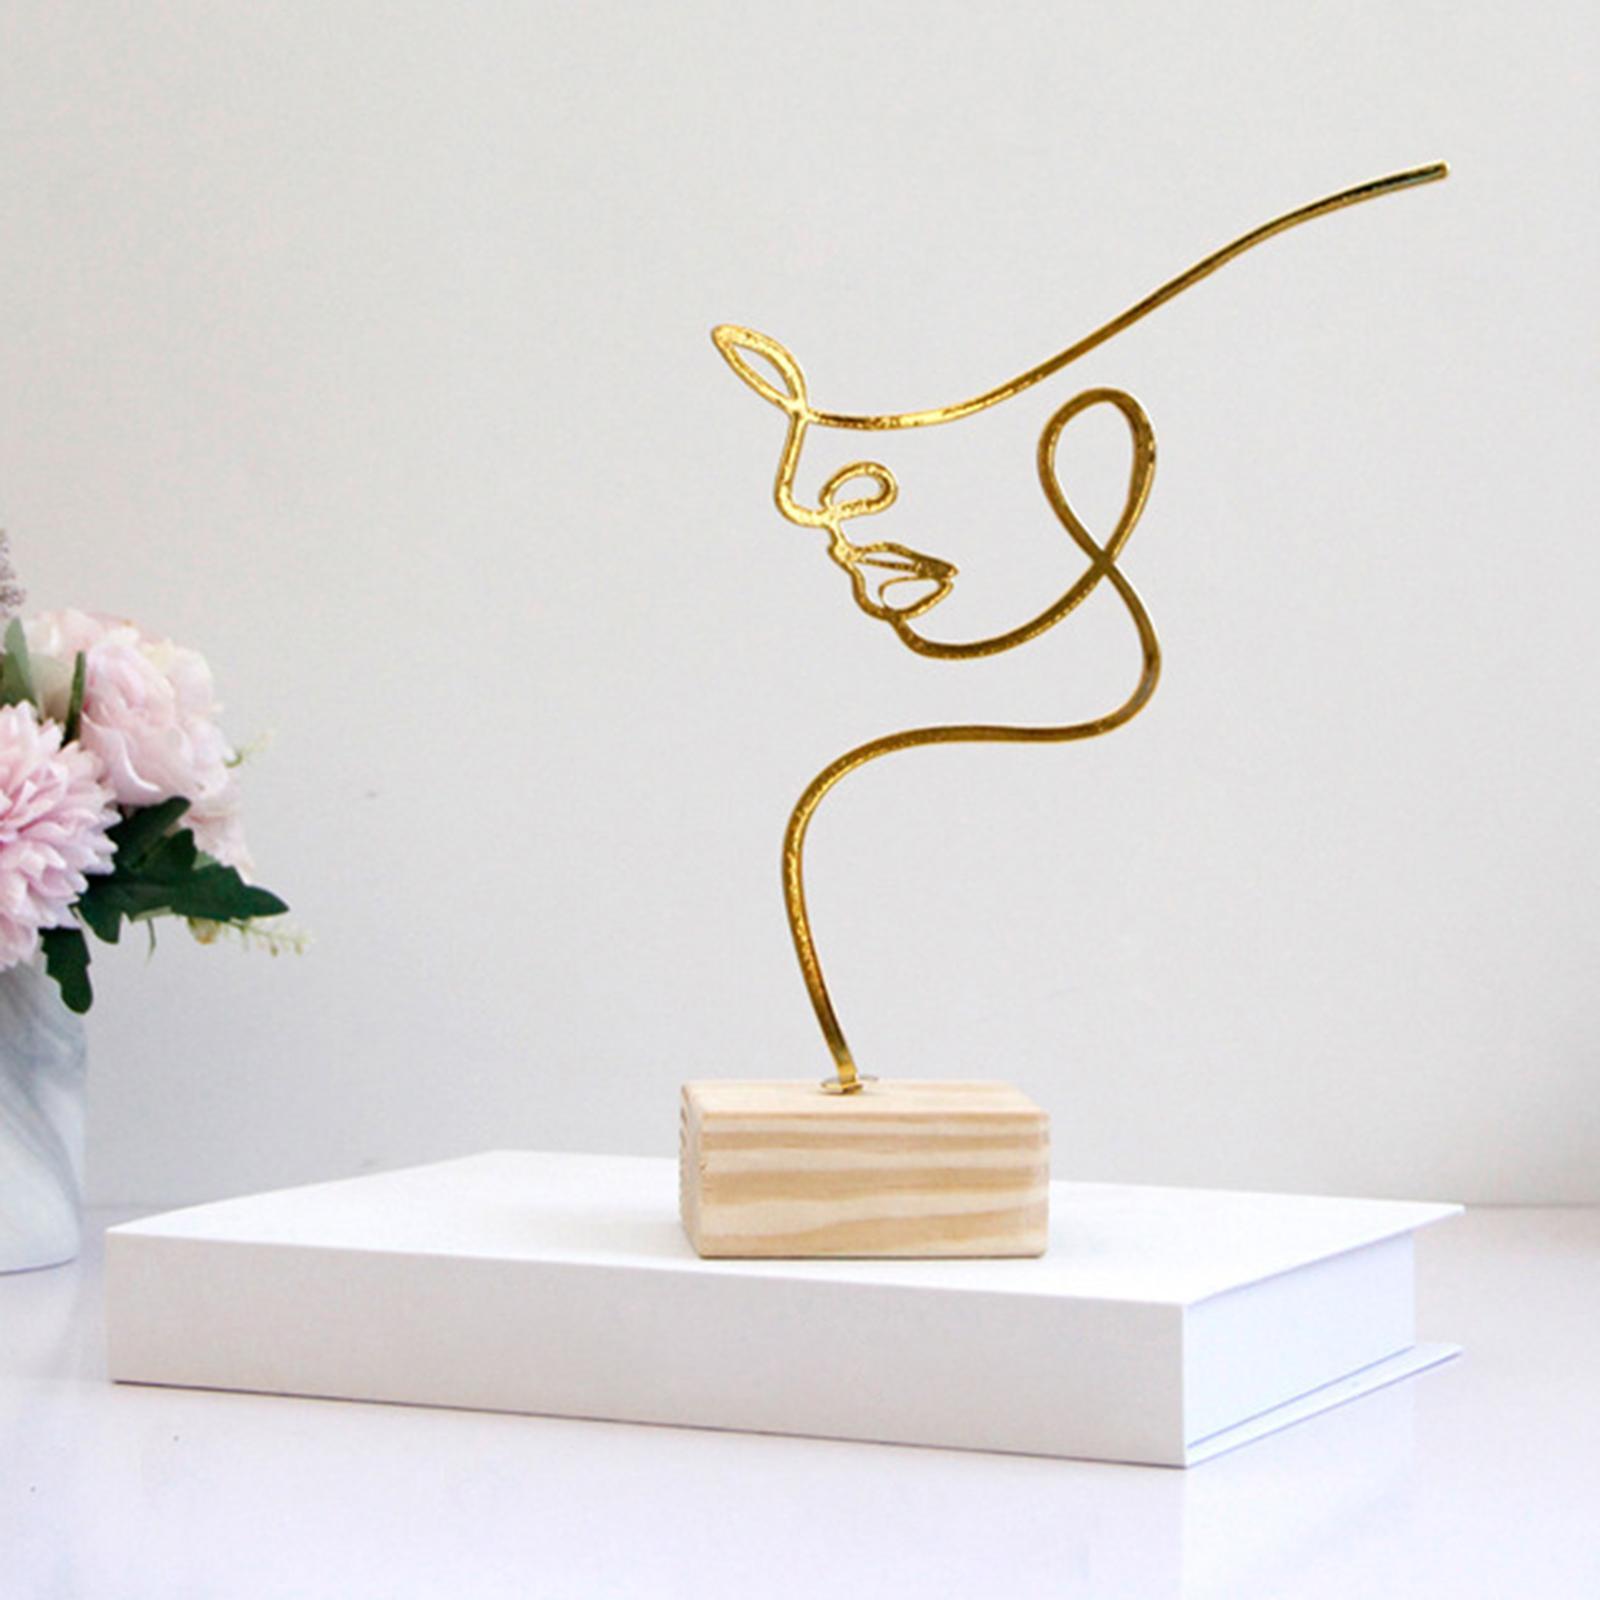 Abstract Art Sculpture Statue Ornament Crafts for Office Decor